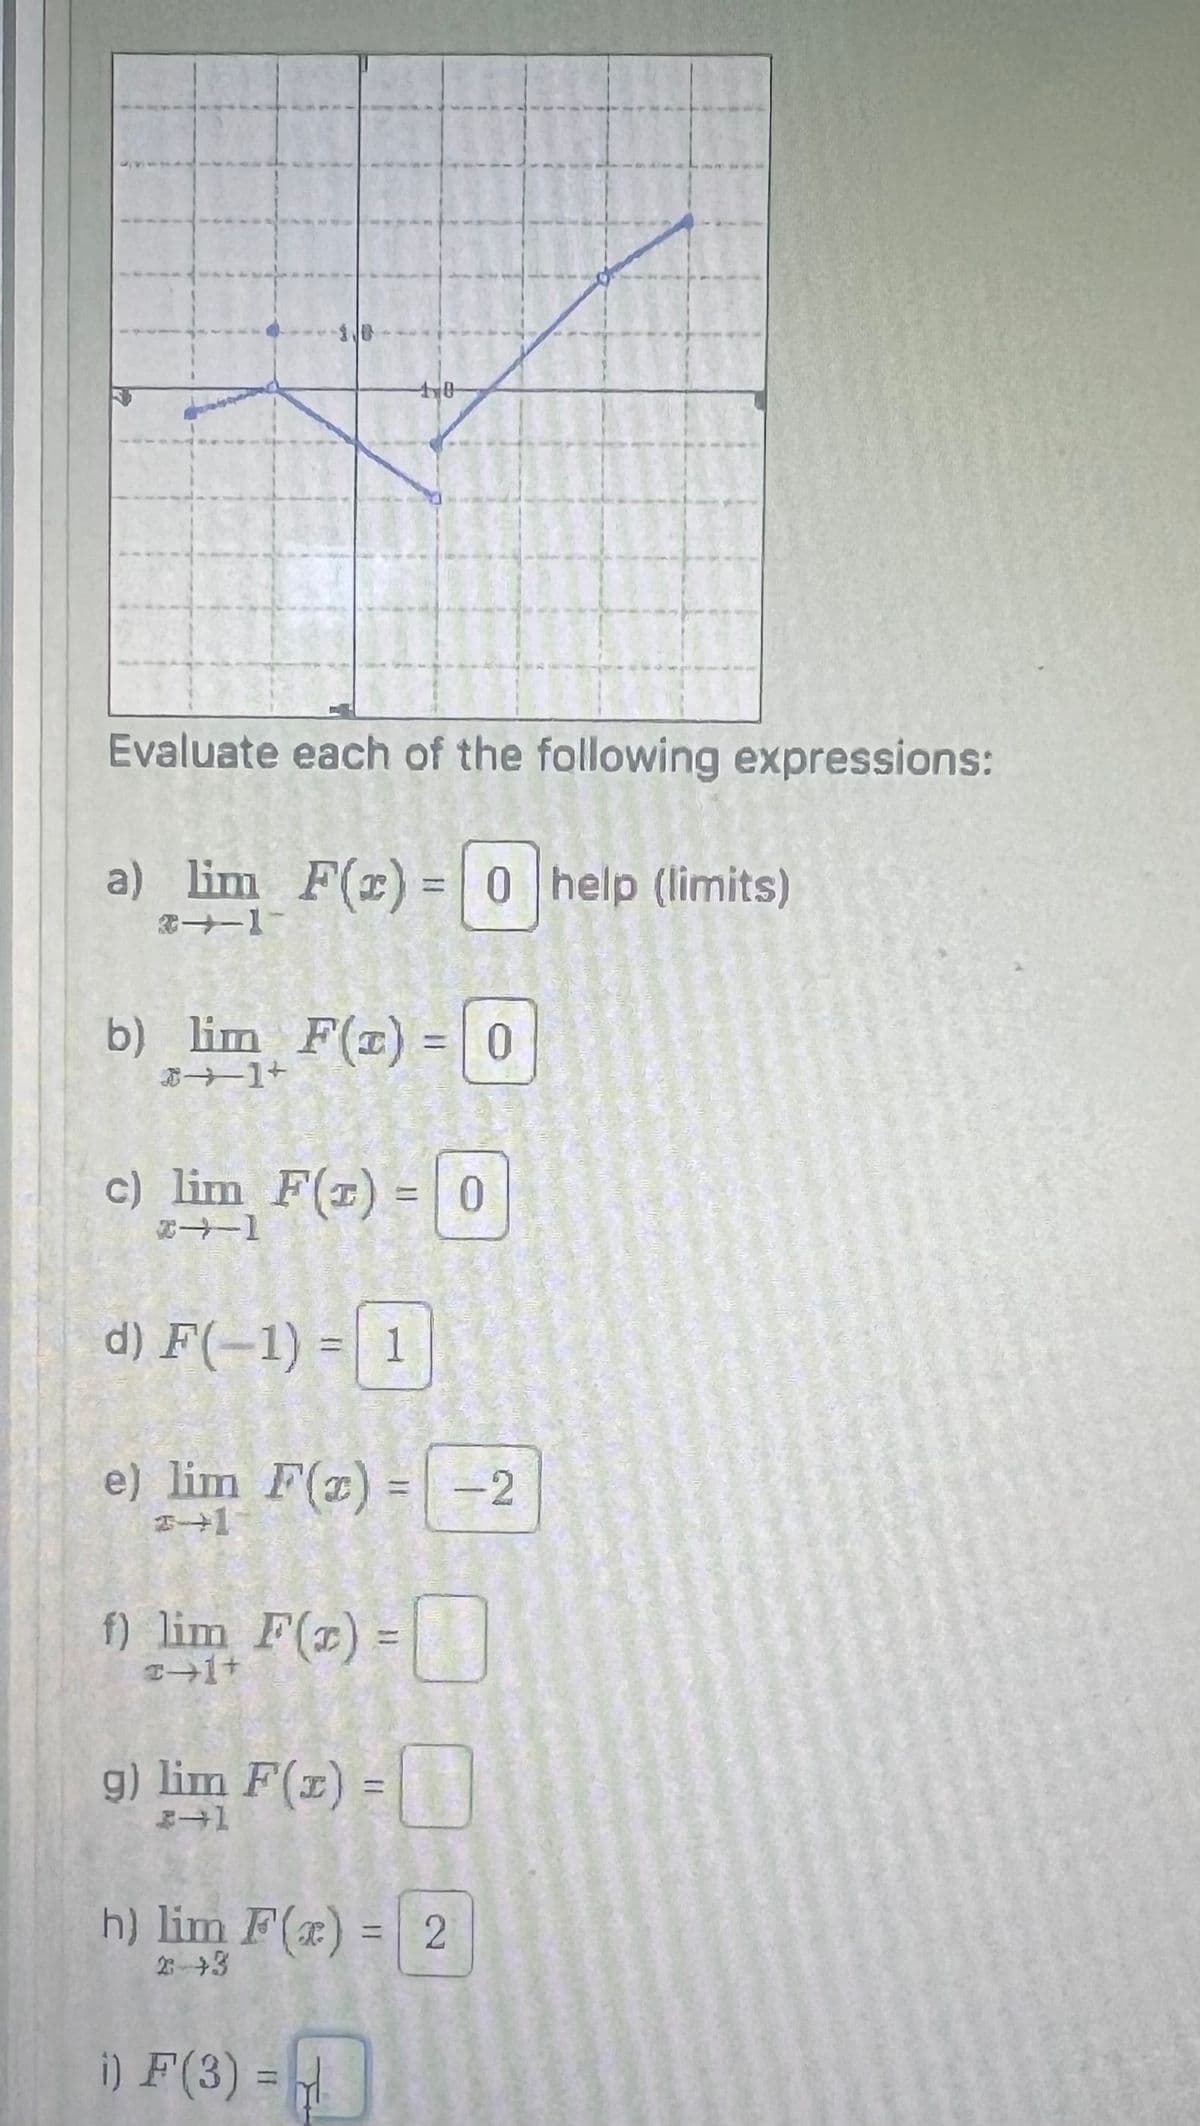 10
Evaluate each of the following expressions:
a) lim F(x)=0 help (limits)
31
b) lim F(x) = 0
+[个
c) lim F(x) = 0
2-1
d) F(-1)=1
e) lim F(x)=-2
+1
f) lim F(x) =
2+1+
g) lim F(x):
→1
=
h) lim F(x) = 2
2++3
i) F(3) =